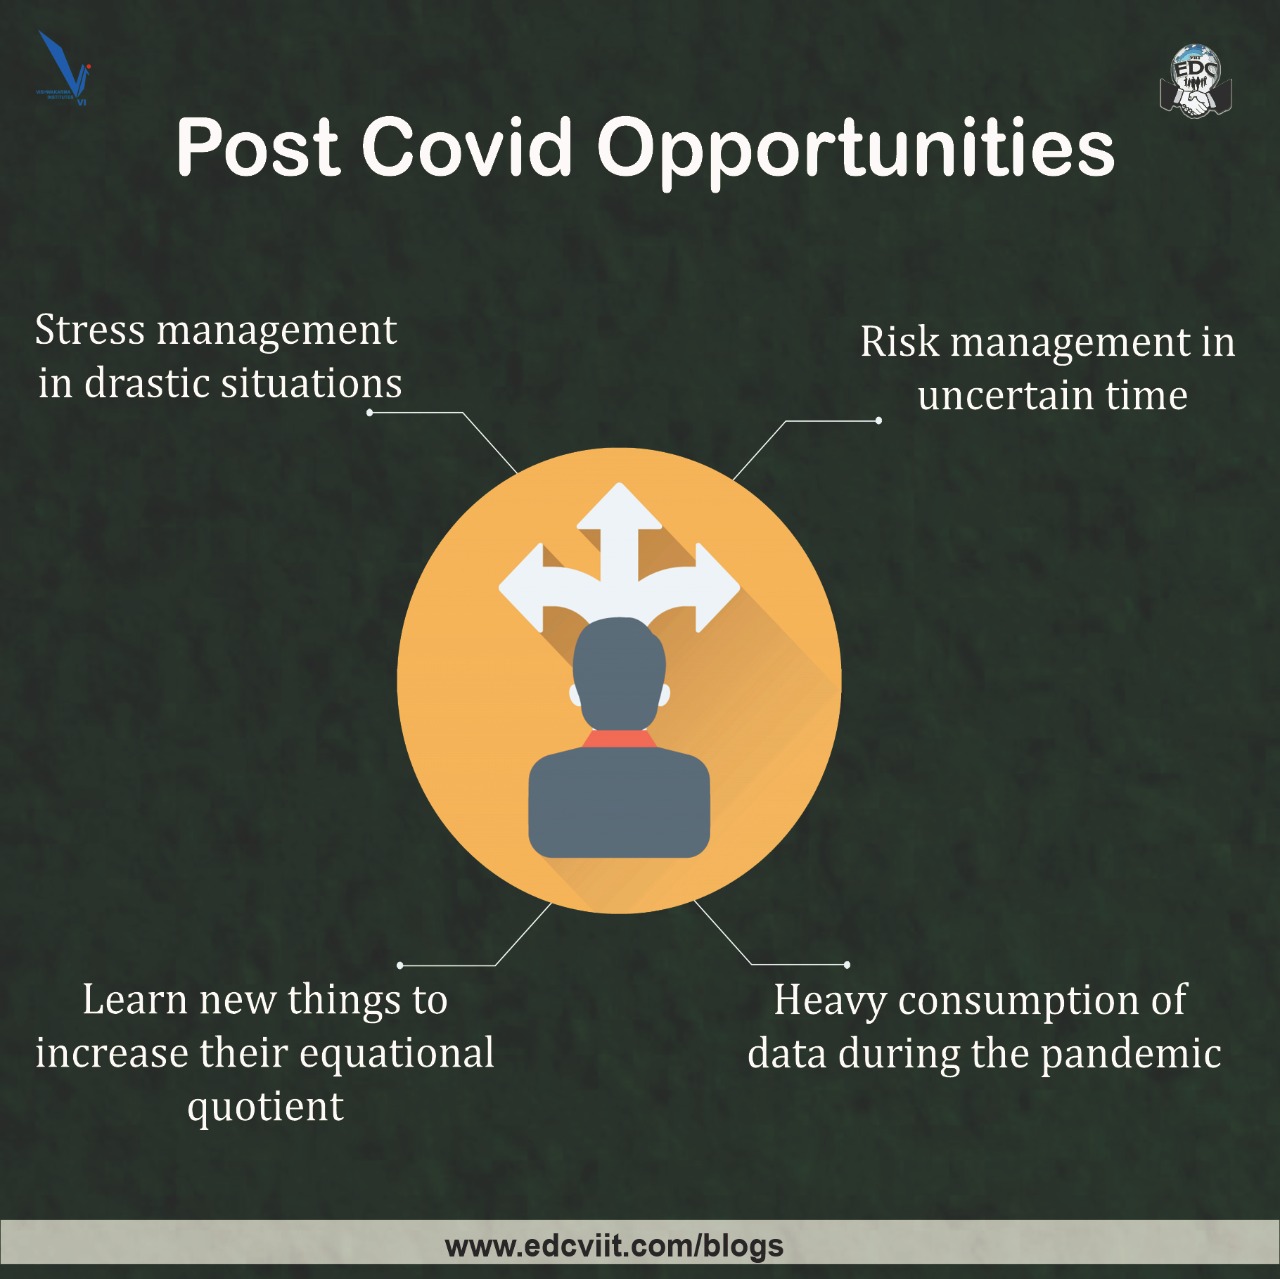 Post Covid Job Opportunities